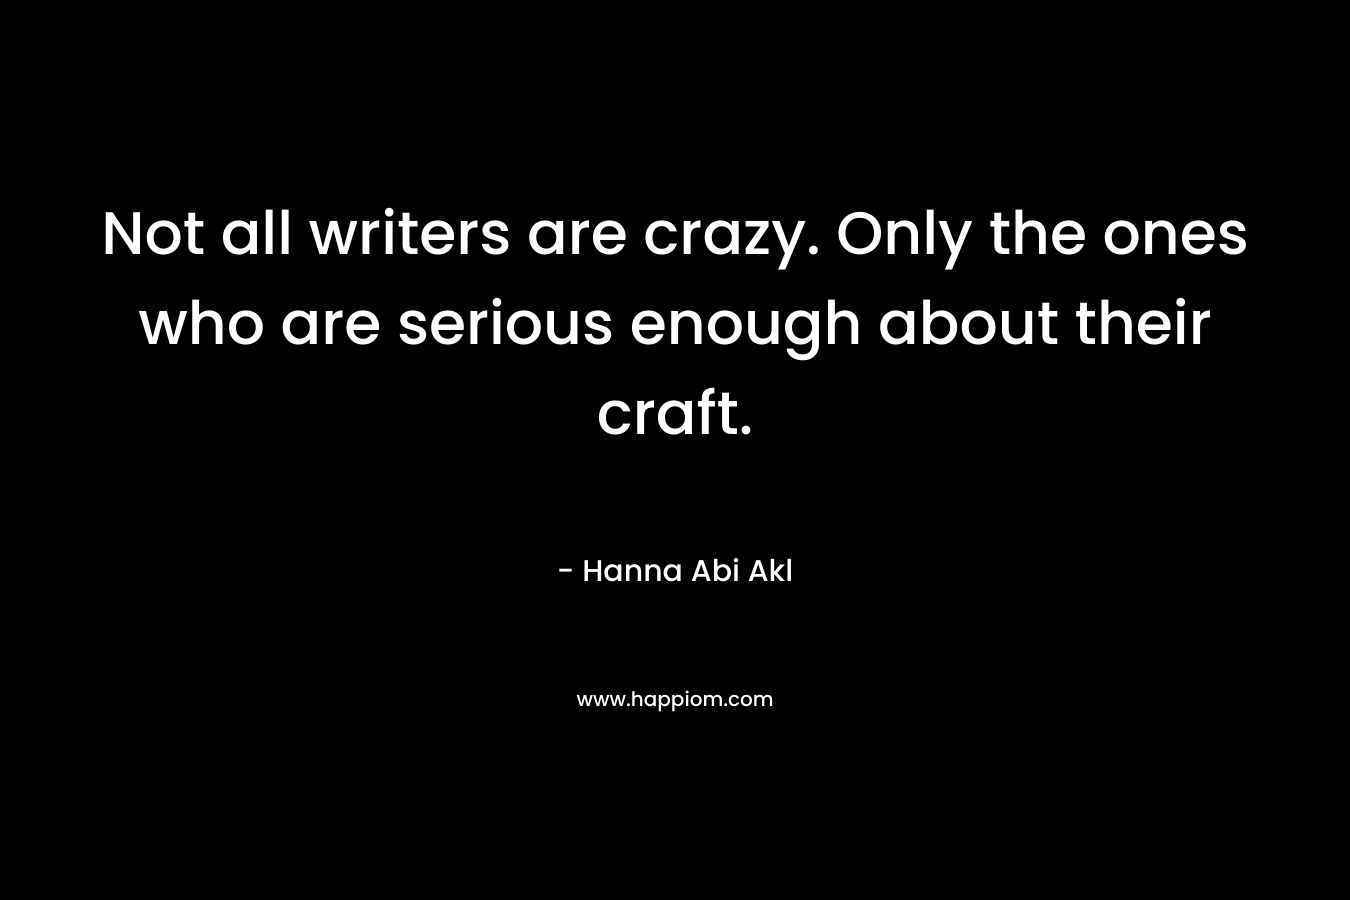 Not all writers are crazy. Only the ones who are serious enough about their craft. – Hanna Abi Akl